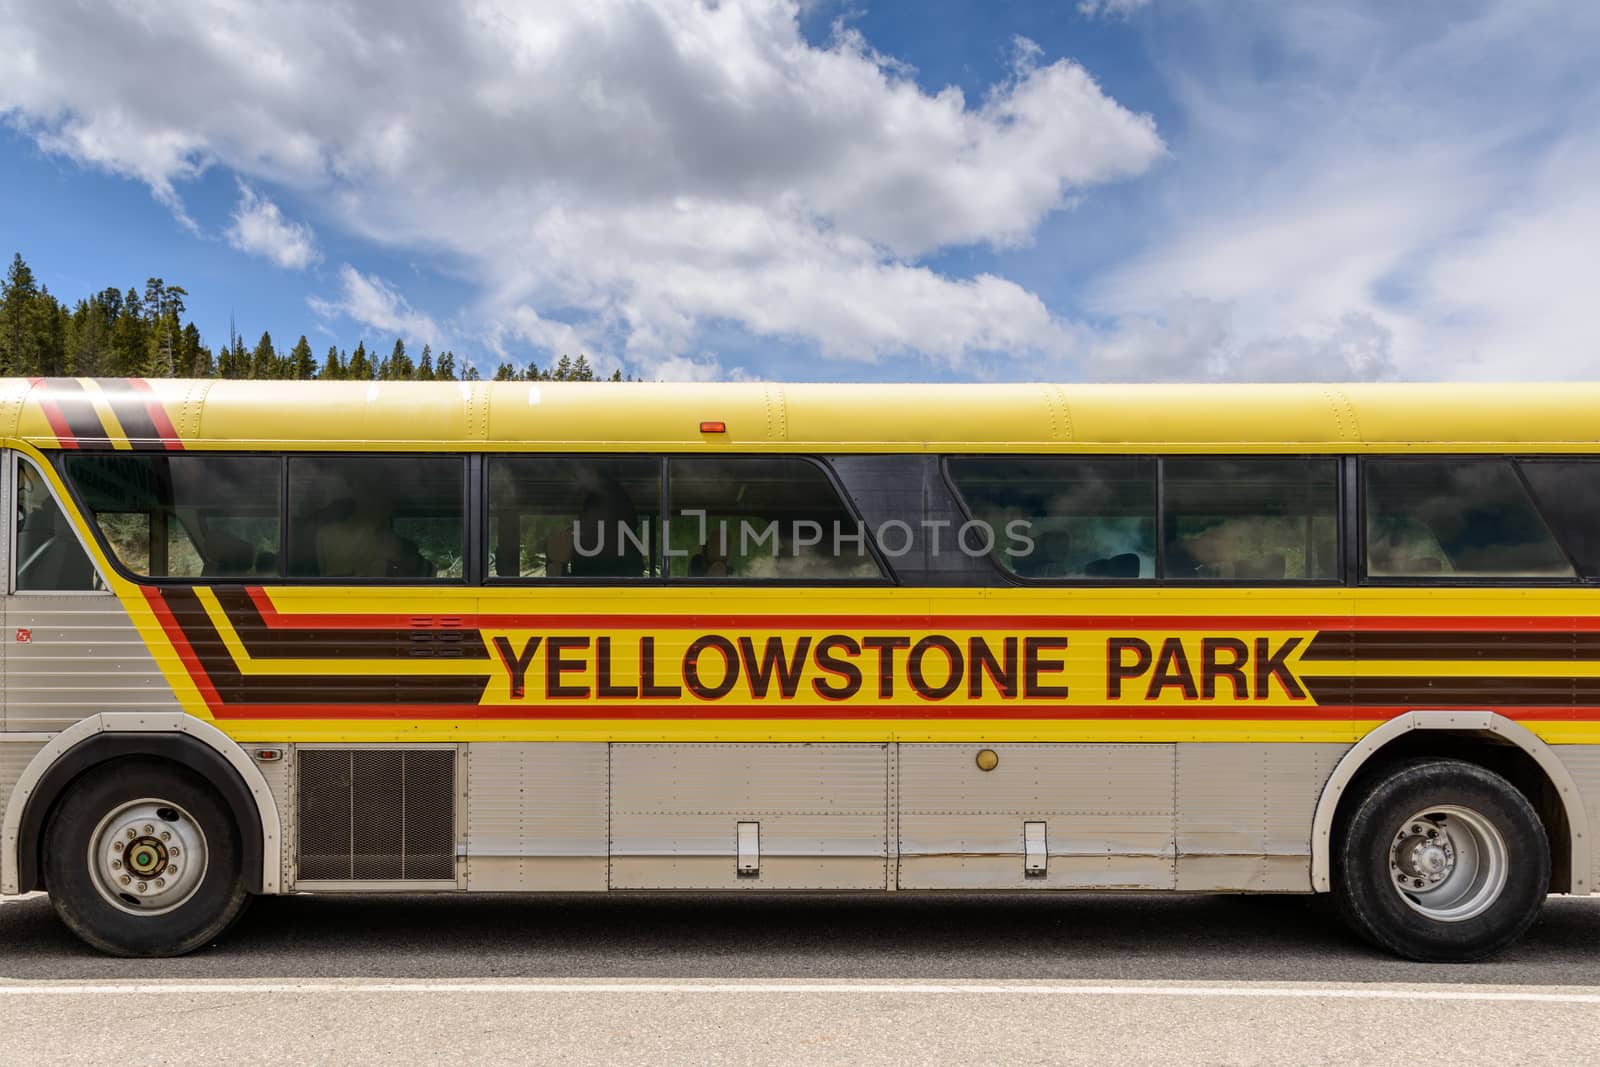 Yellowstone National Park, Wyoming, USA - May 31, 205: Close up of sign for Yellowstone Park on side of Tour Bus.Bus parked at the Mud Volcano Area on the Grand Loops Road in Yellowstone National Park in Wyoming.